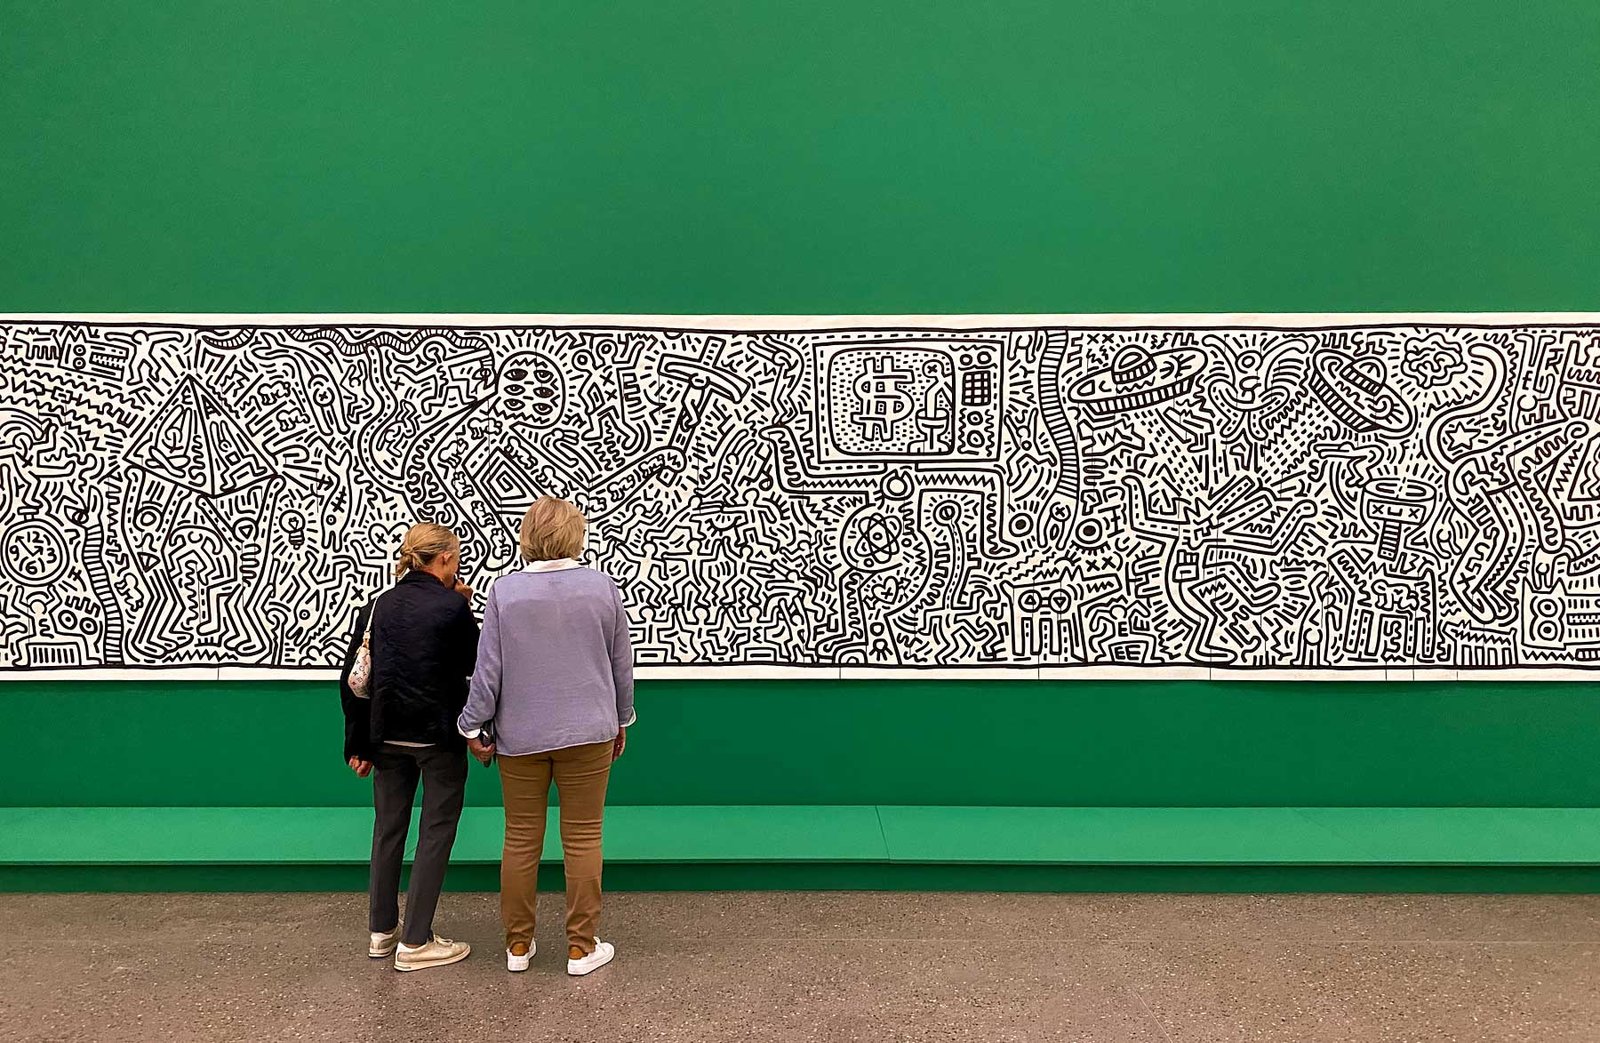 Keith Haring exhibition at Museum Folkwang in Essen Germany. One of the best things to do in the Ruhr Region.